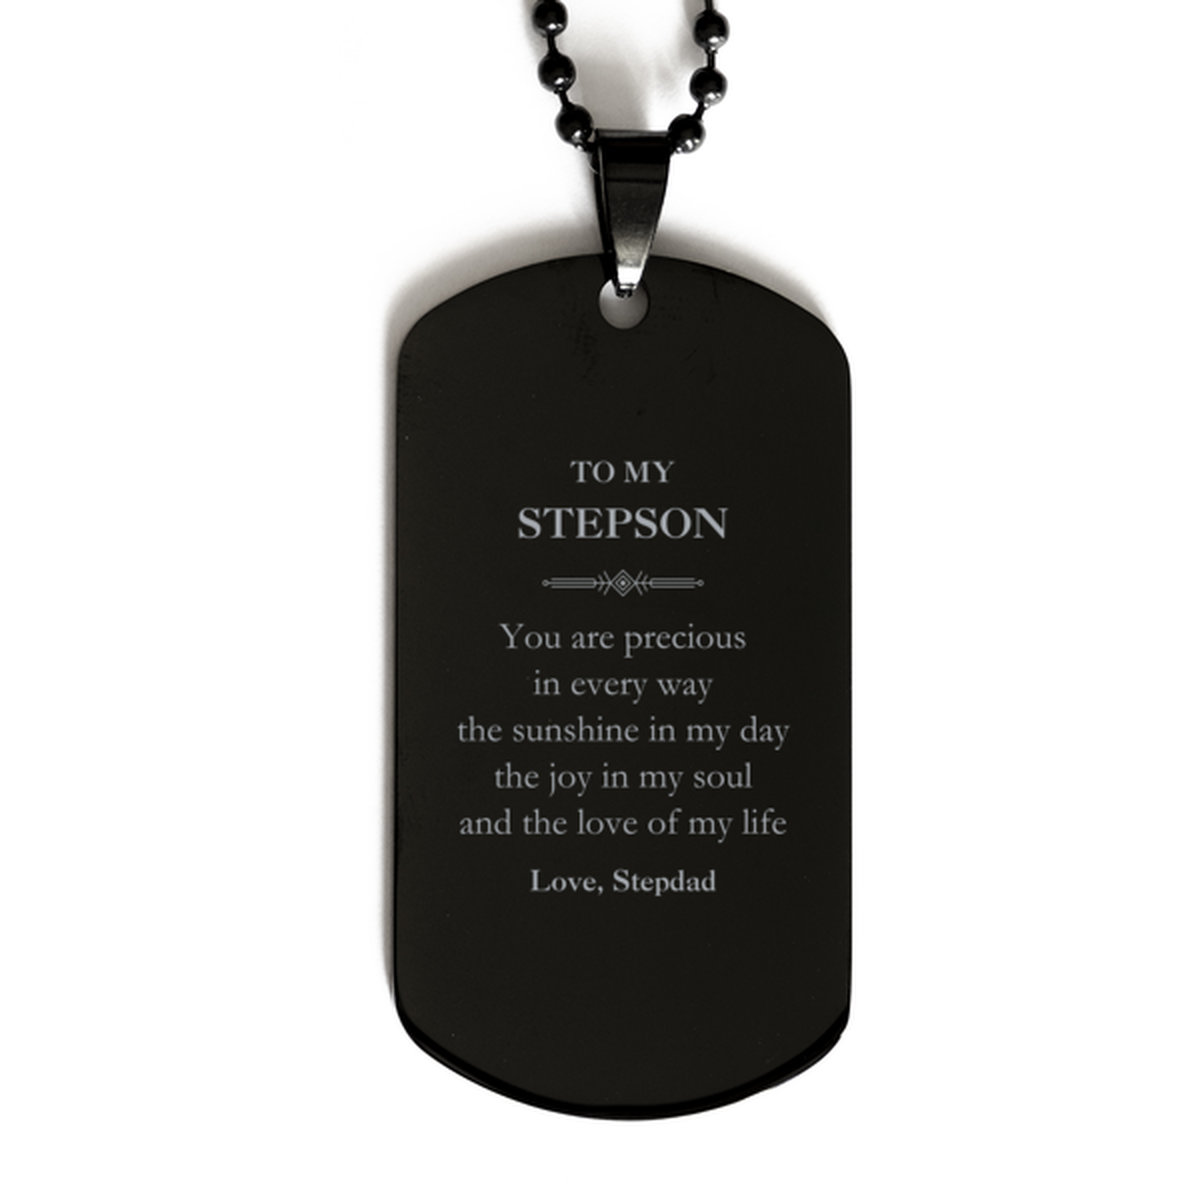 Graduation Gifts for Stepson Black Dog Tag Present from Stepdad, Christmas Stepson Birthday Gifts Stepson You are precious in every way the sunshine in my day. Love, Stepdad